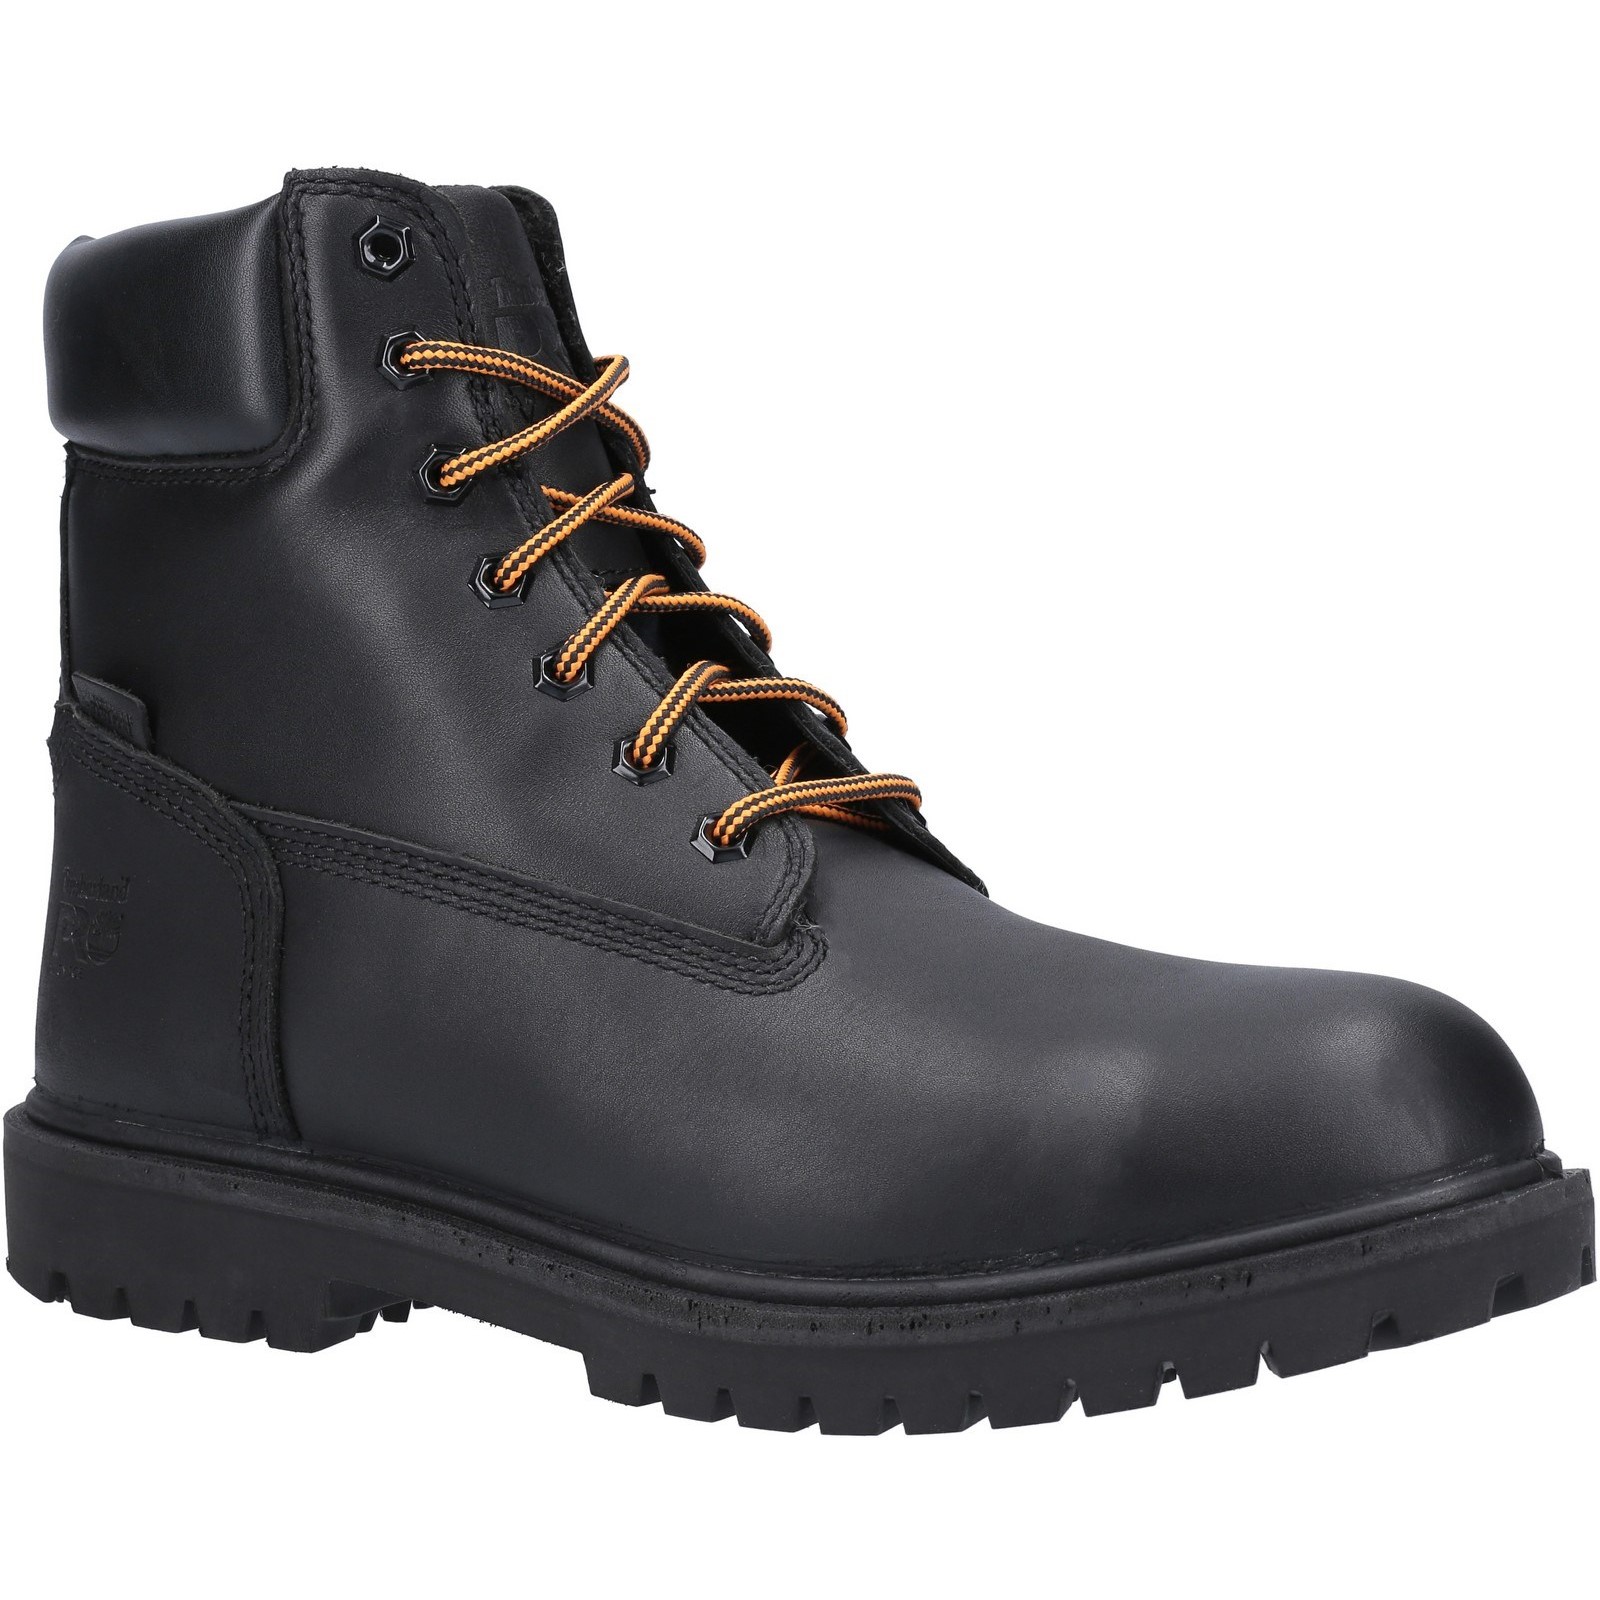 Iconic Safety Toe Work Boot Black